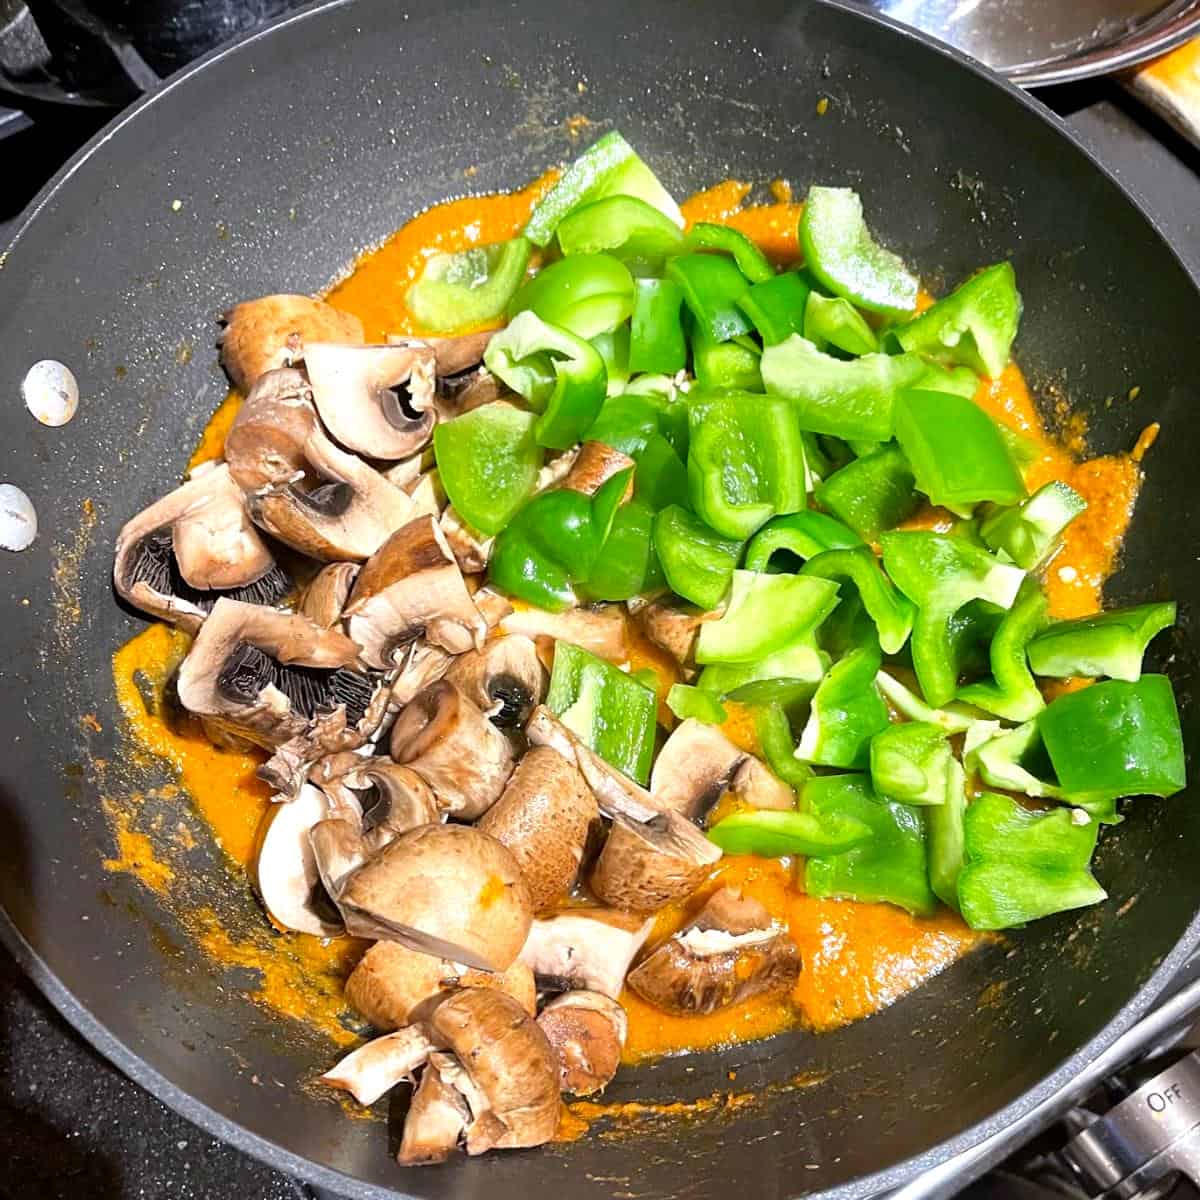 Mushrooms and bell peppers added to mushroom makhani sauce.